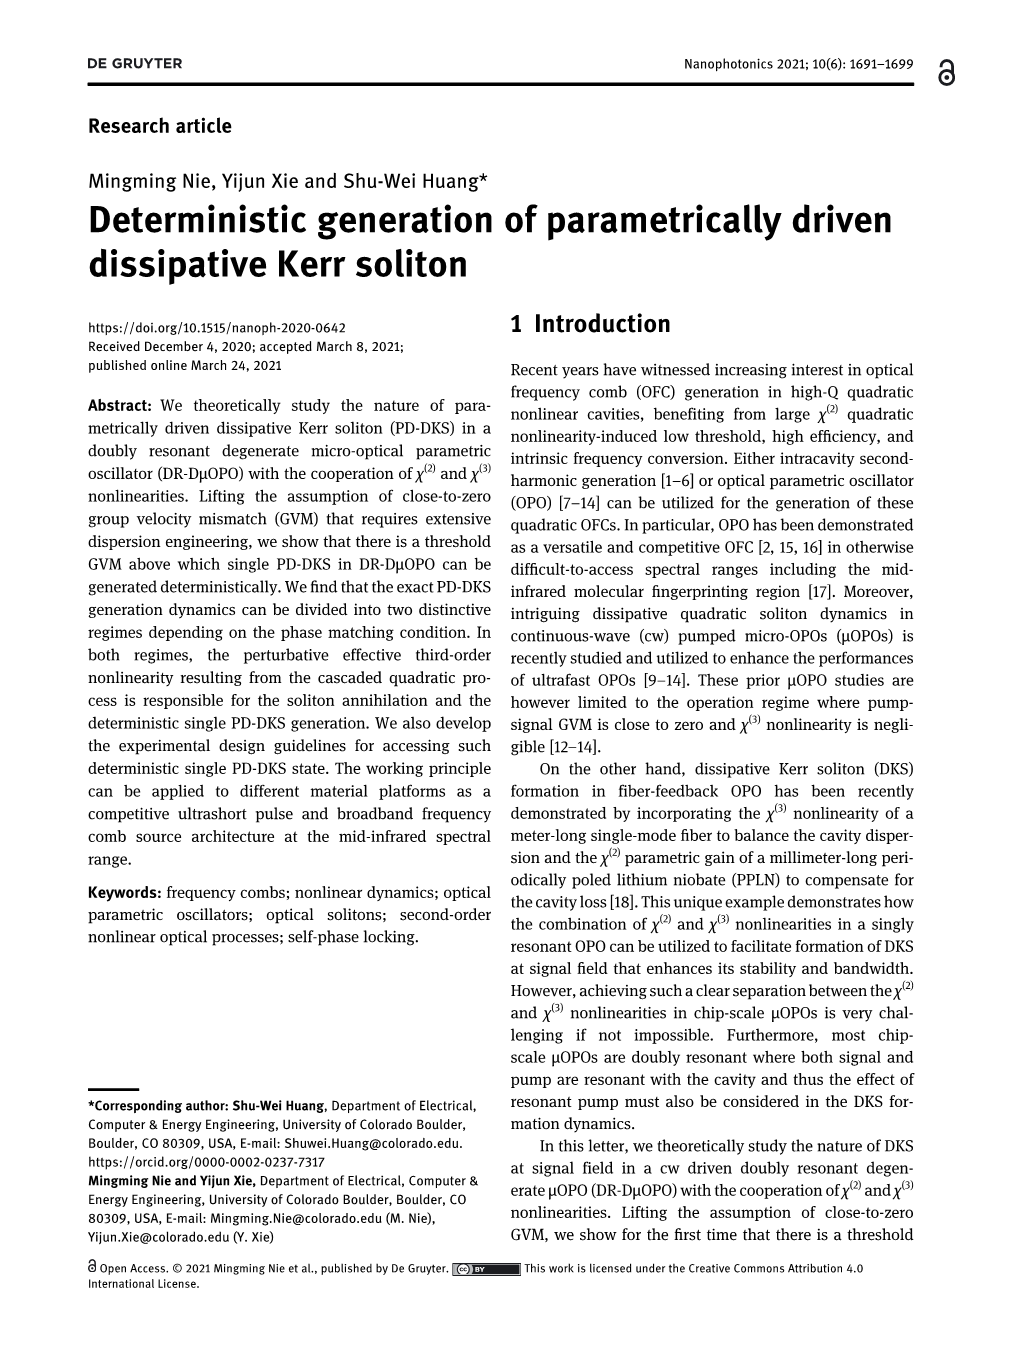 Deterministic Generation of Parametrically Driven Dissipative